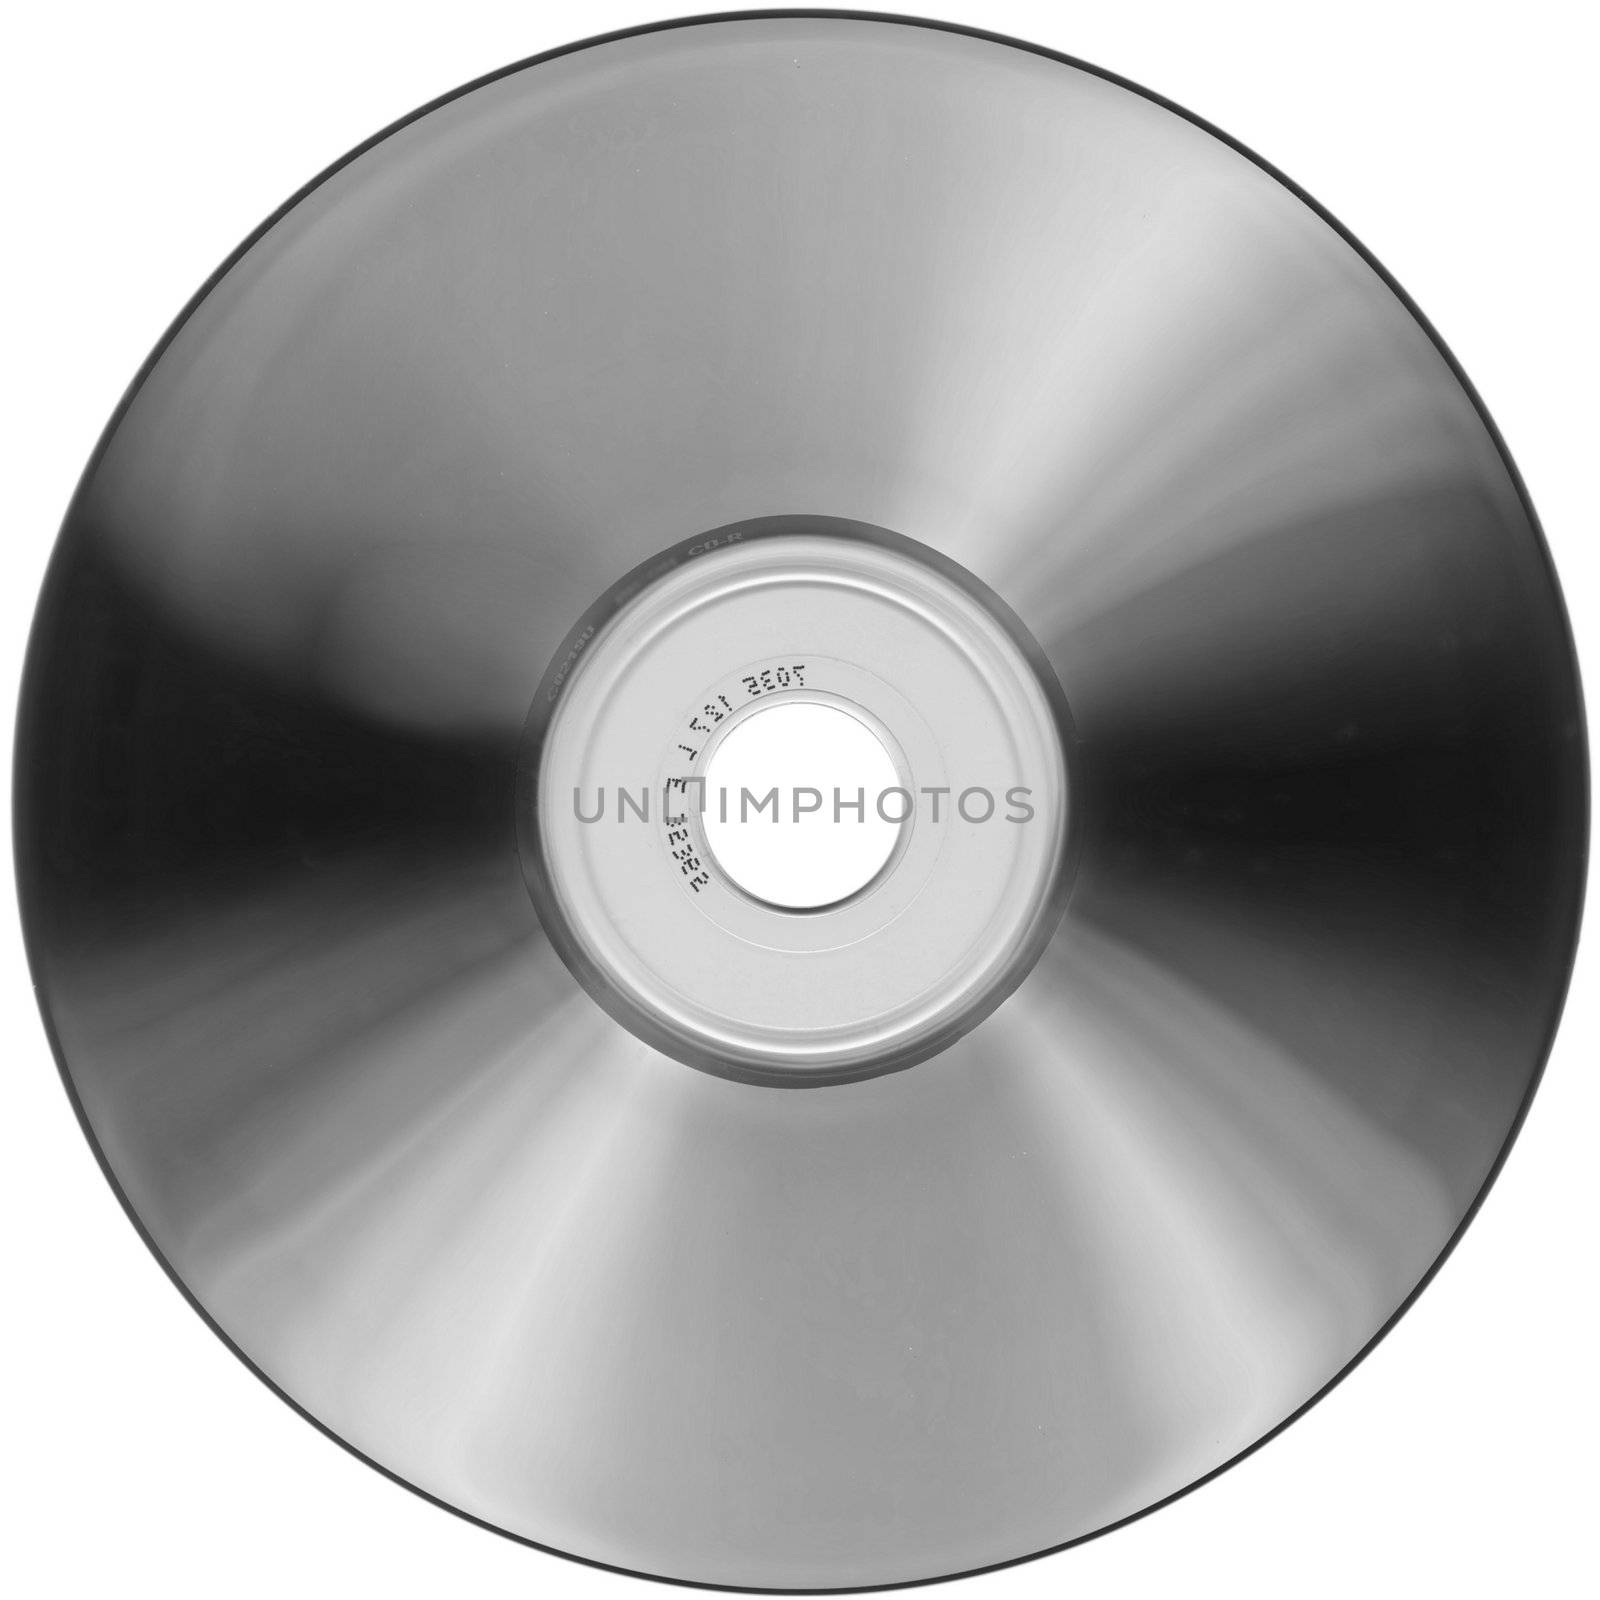 CD DVD storage support for audio music video data